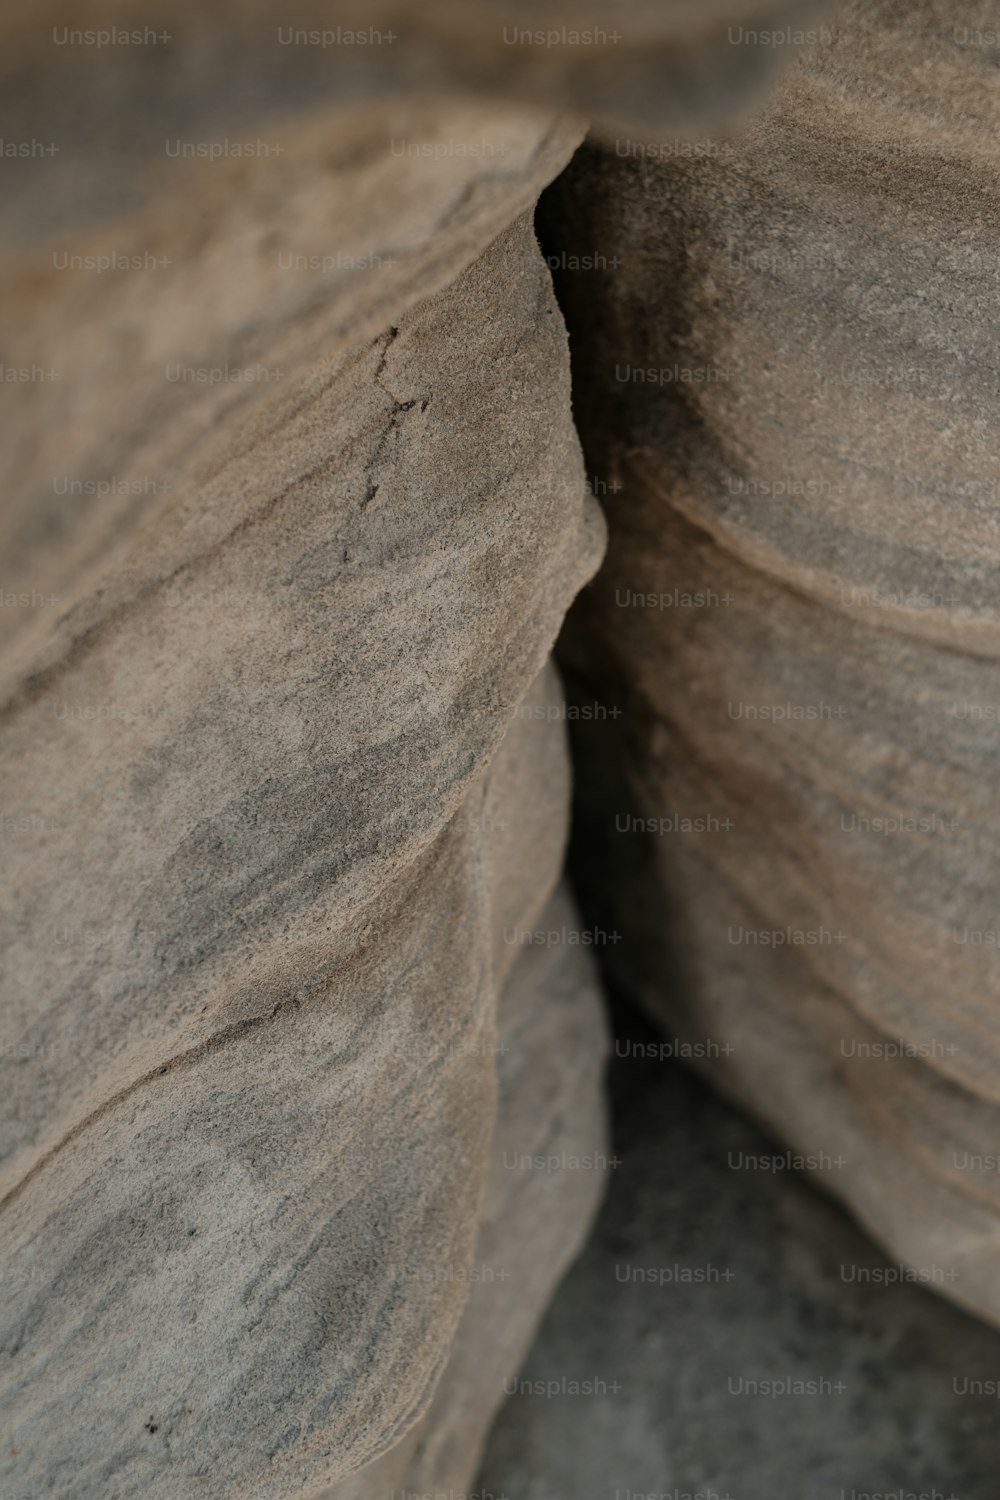 a close up of some rocks with a cell phone